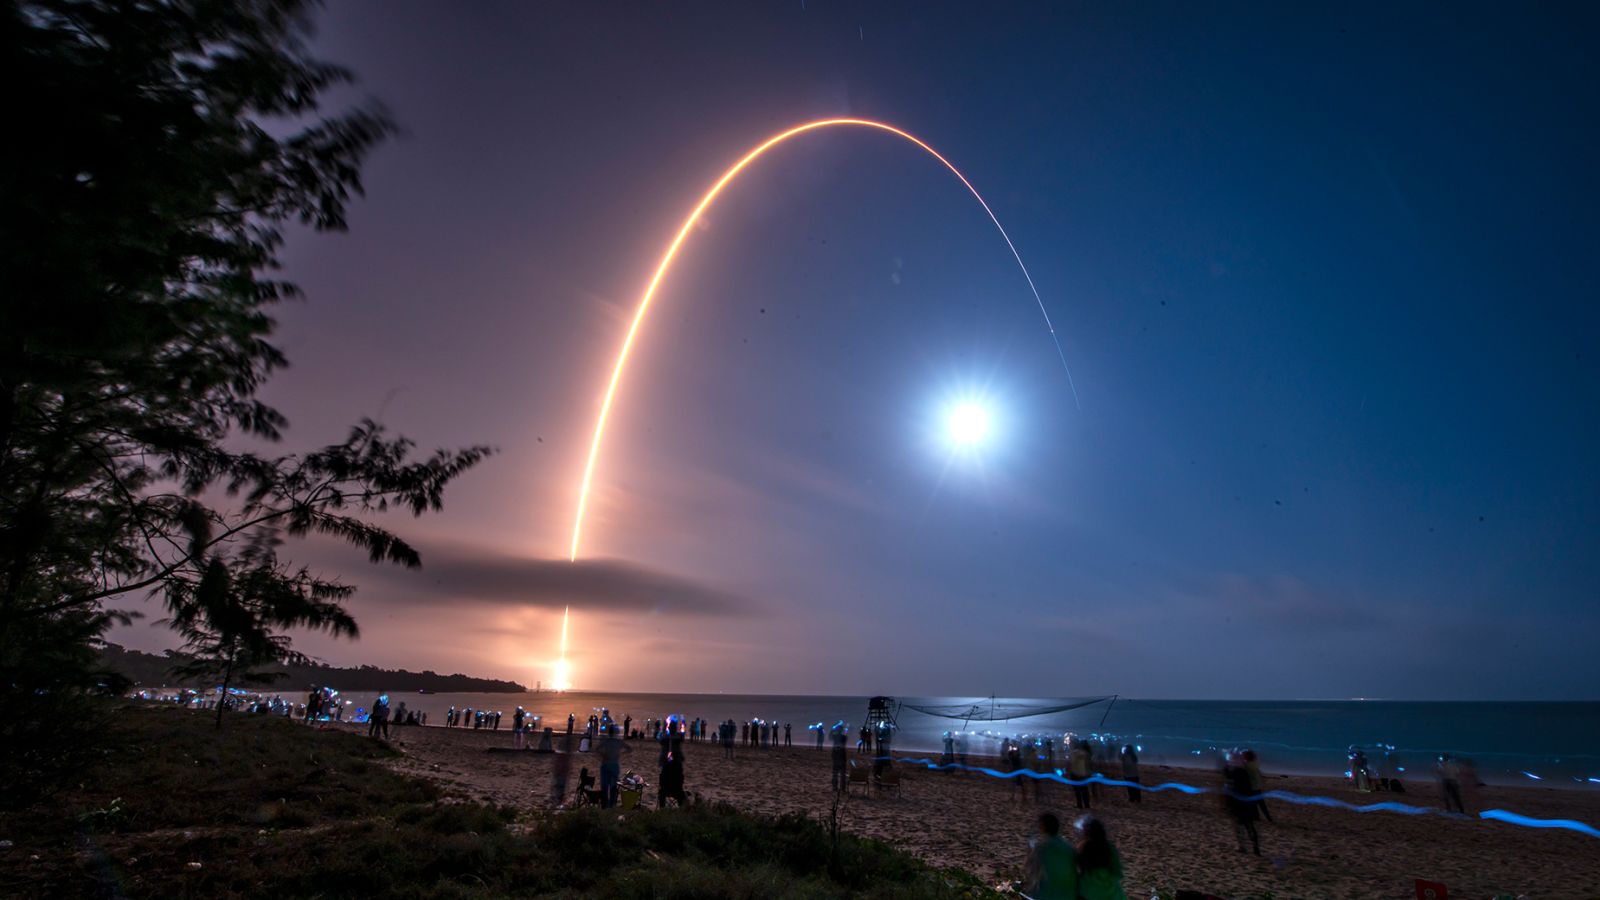 China’s Cape Canaveral is booming, fueled by the lunar mission and space program